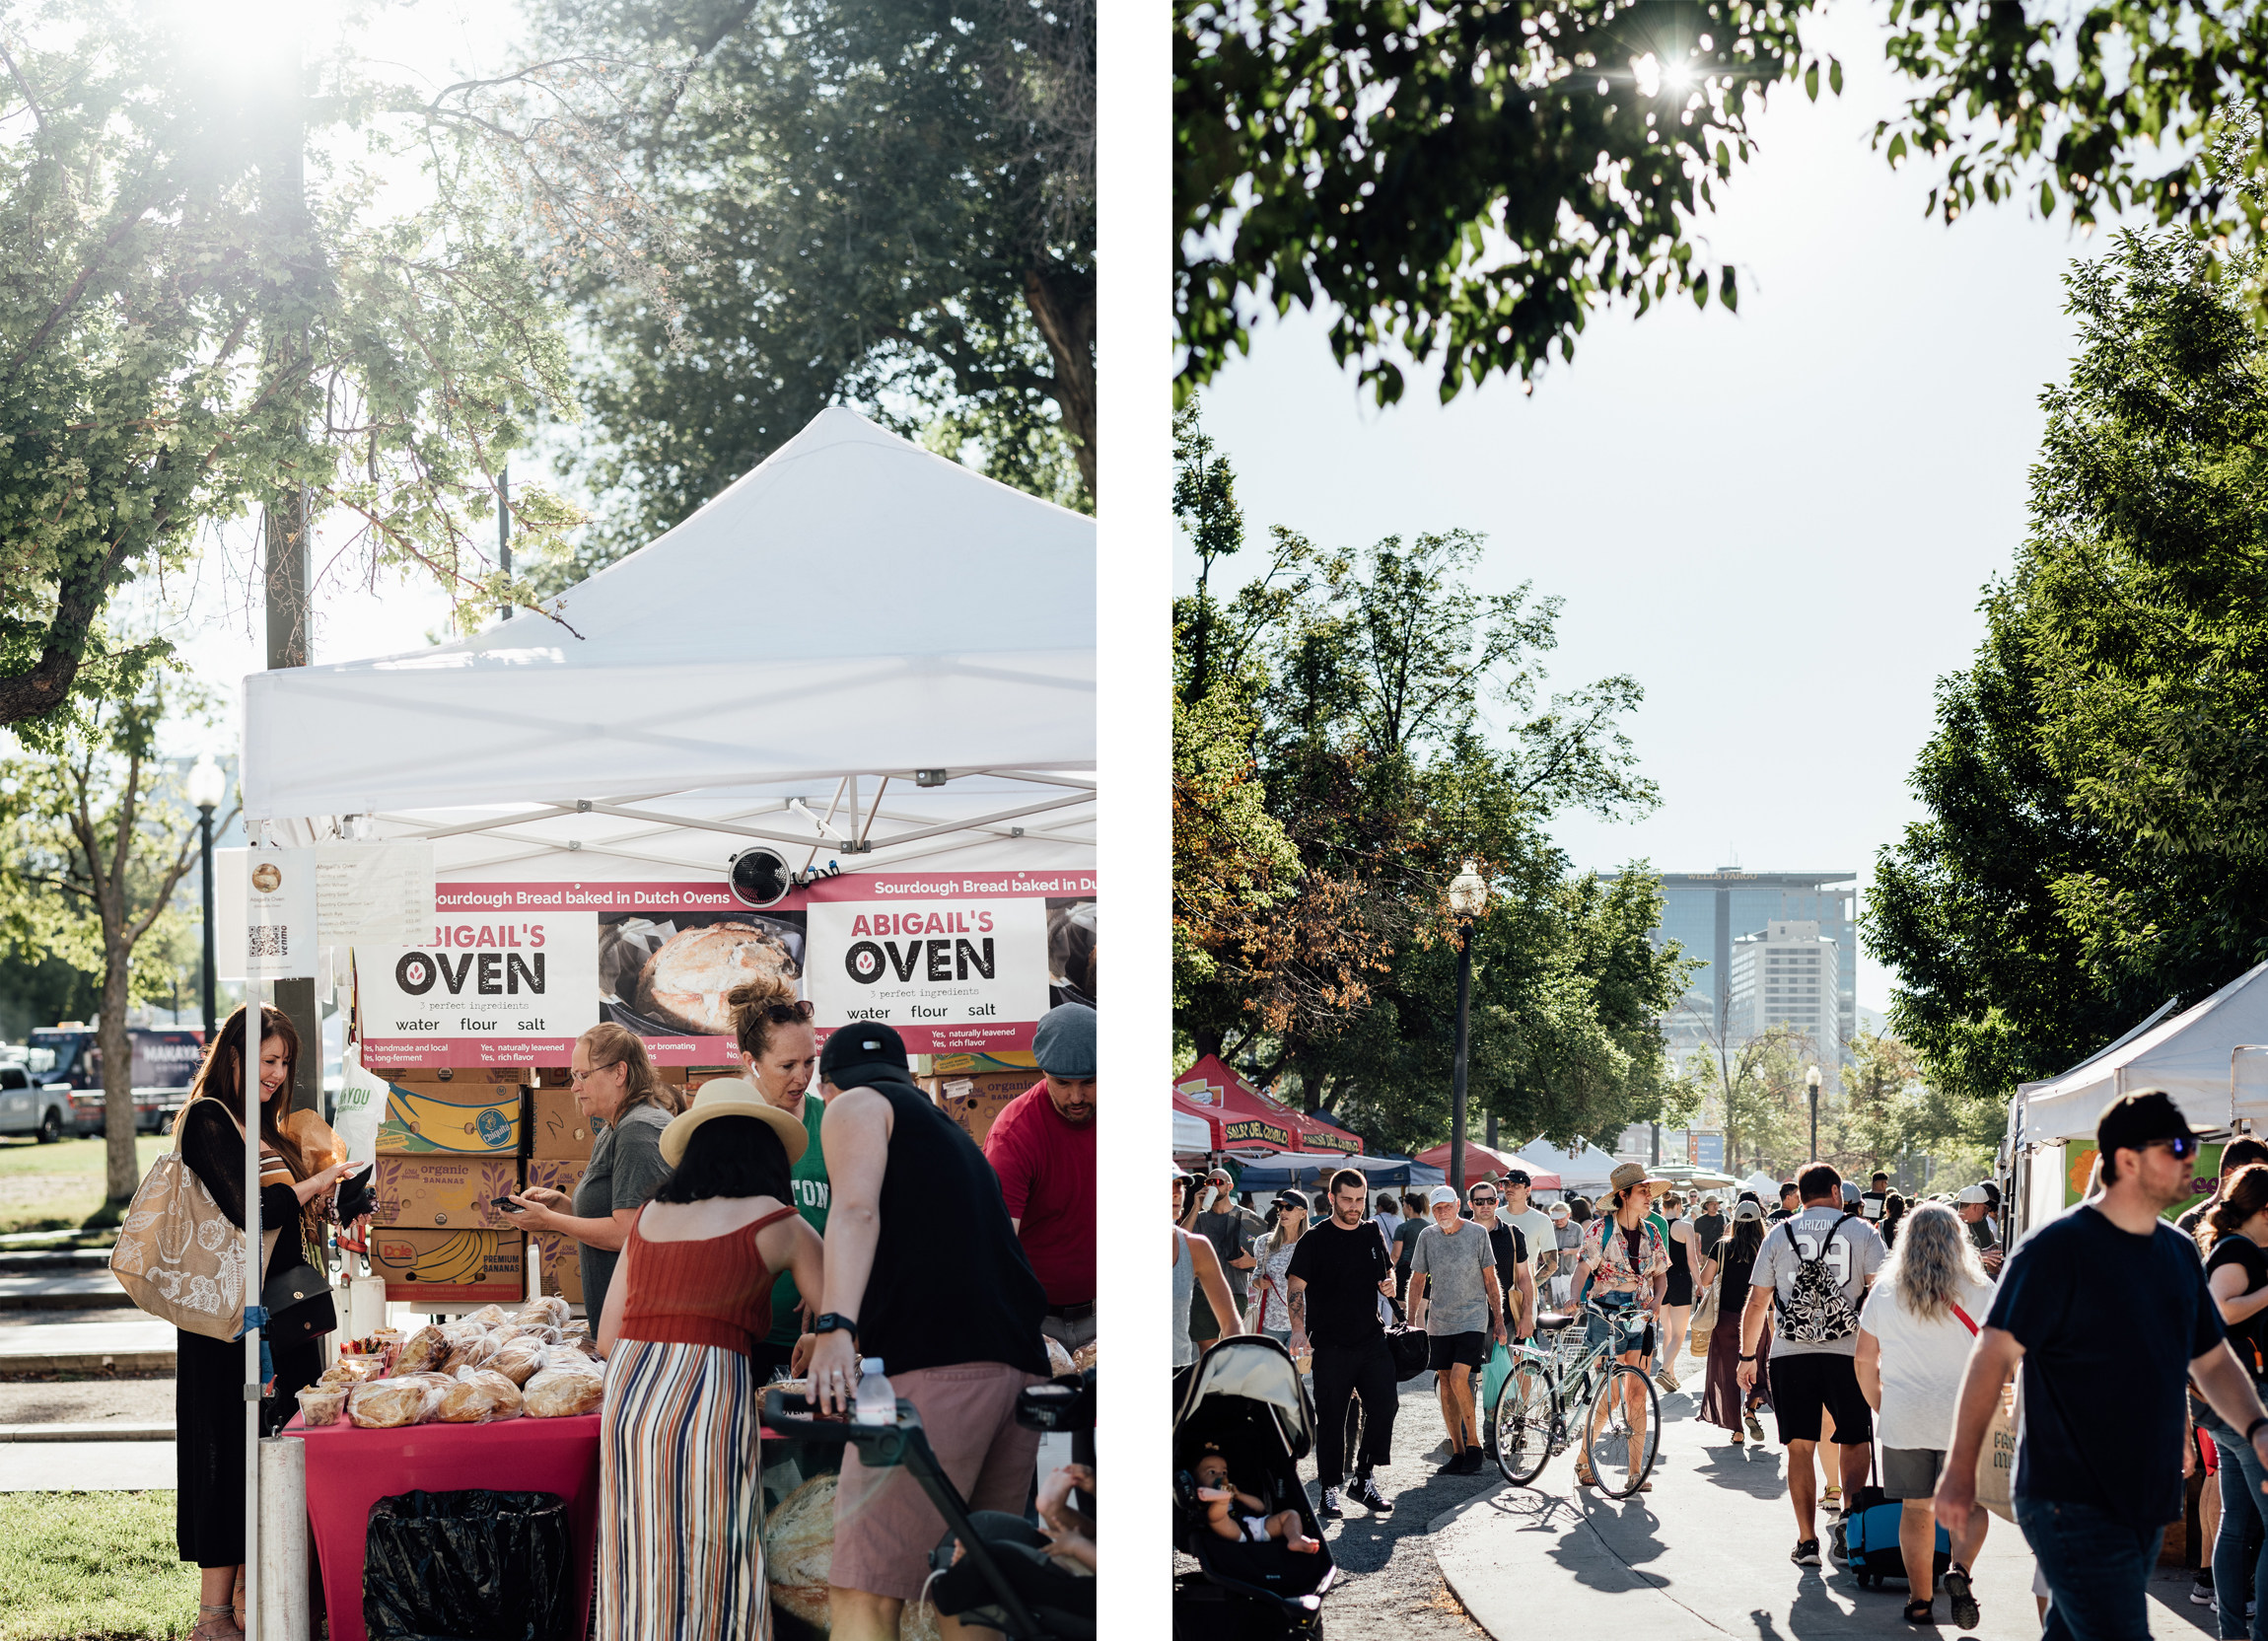 Cultivating Community: Salt Lake City's Weekly Farmers Market